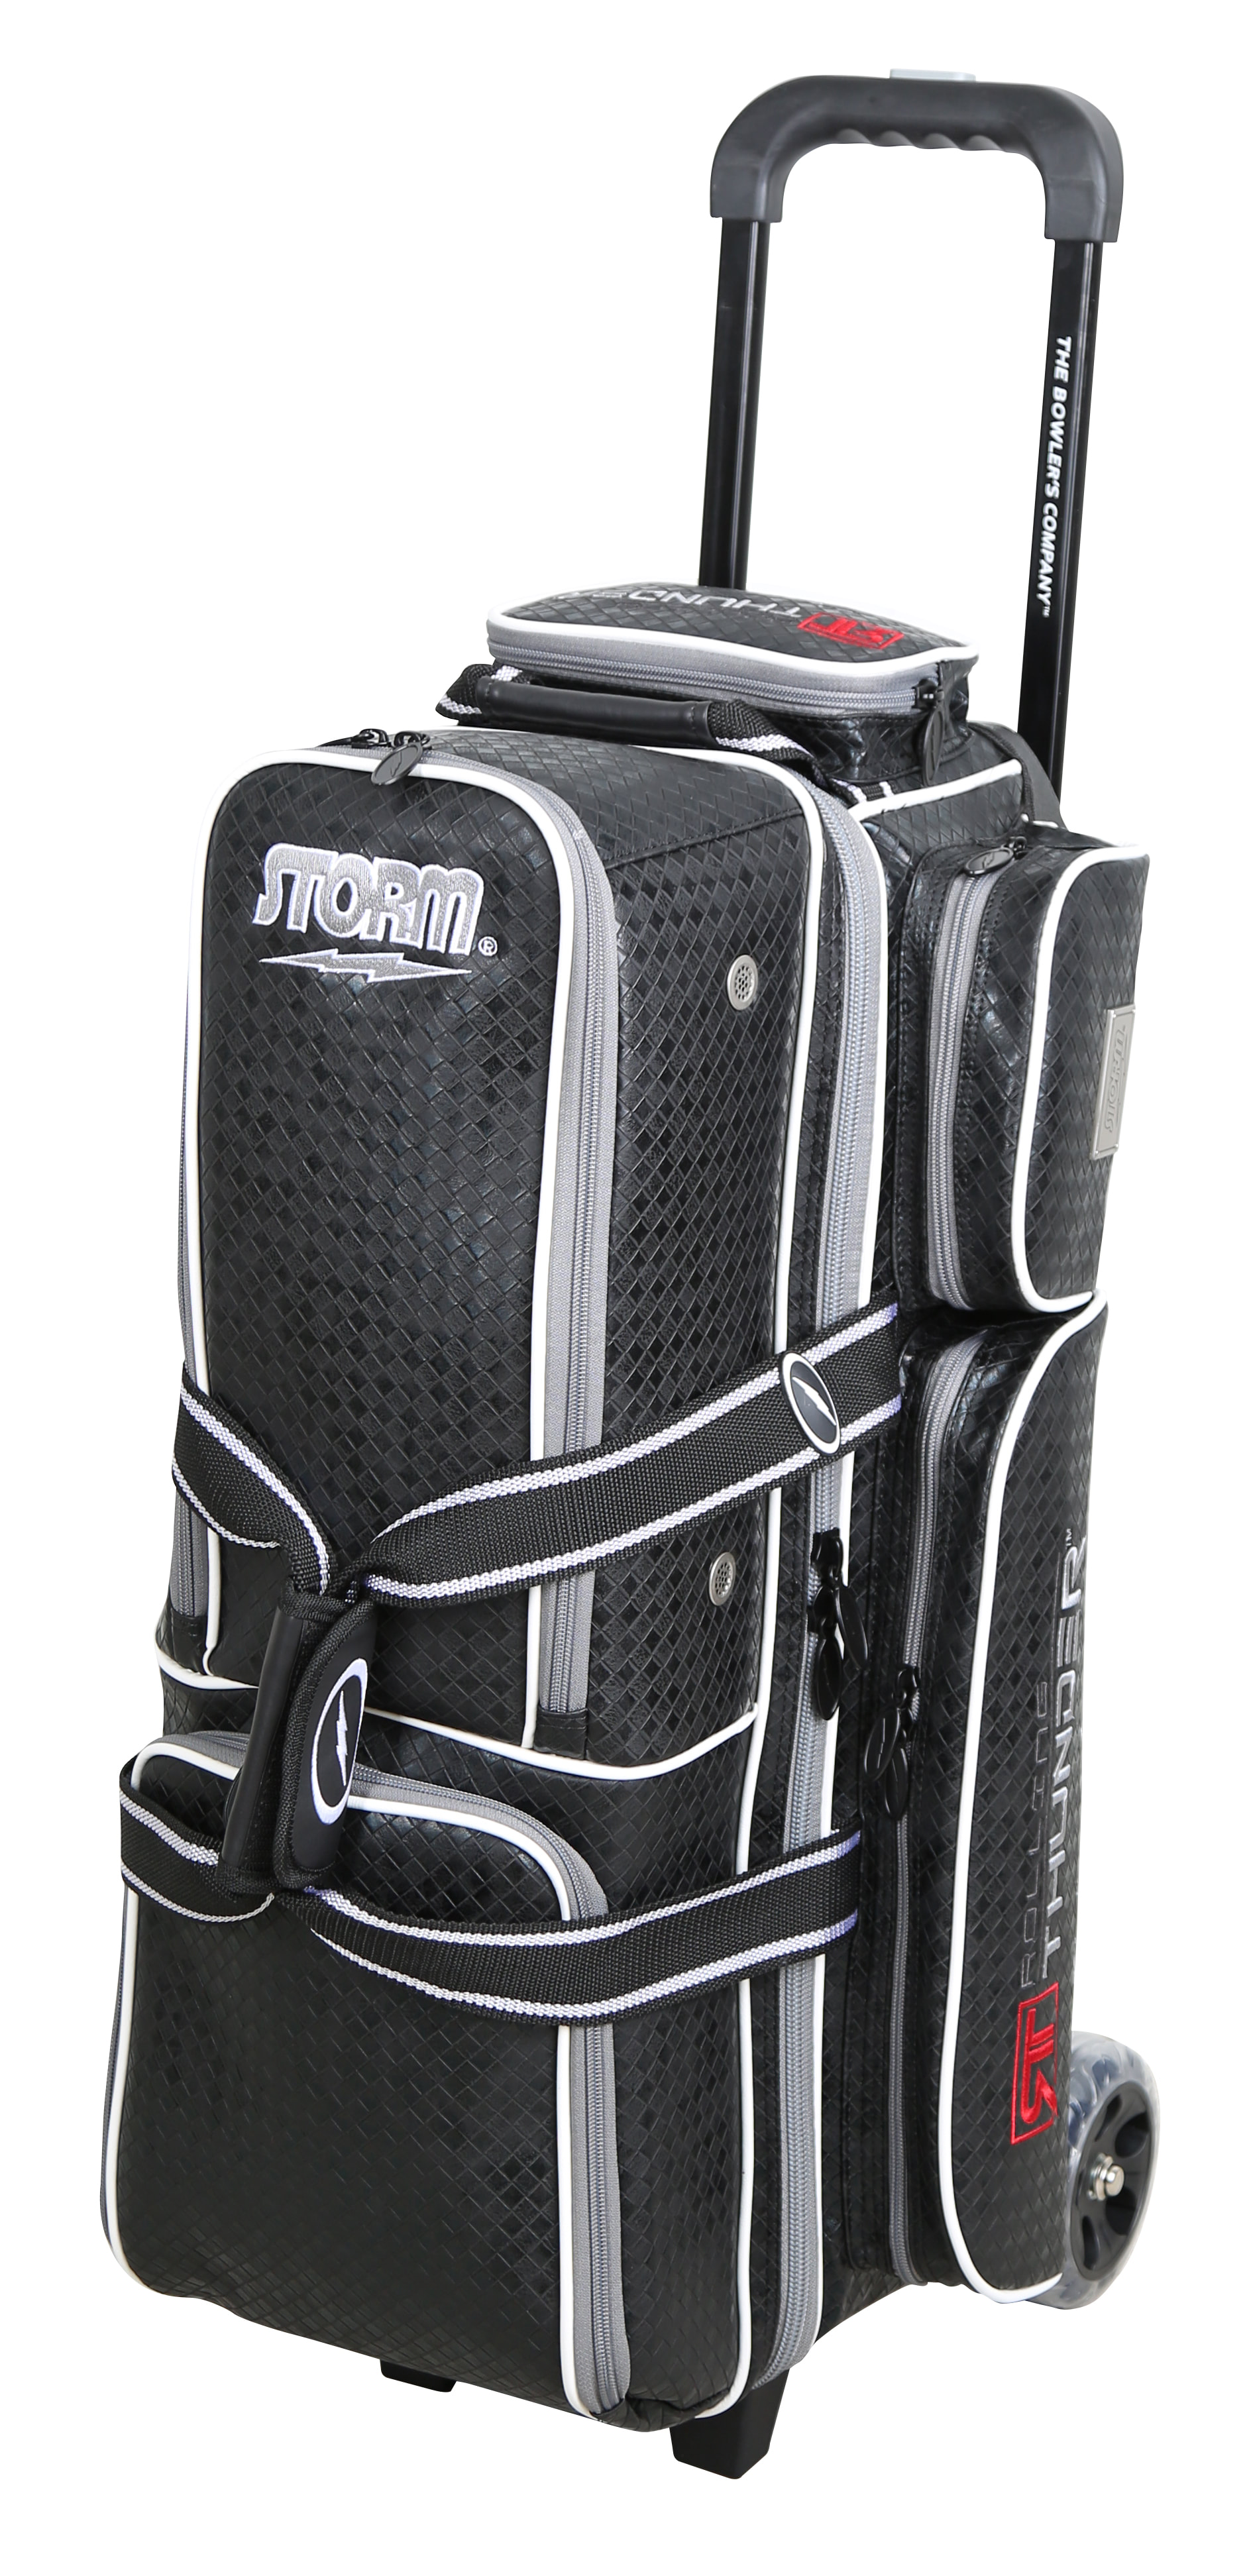 STORM 3-BALL ROLLING THUNDER CHARCOAL PLAID/GREY/BLACK BOWLING BAG IN STOCK 